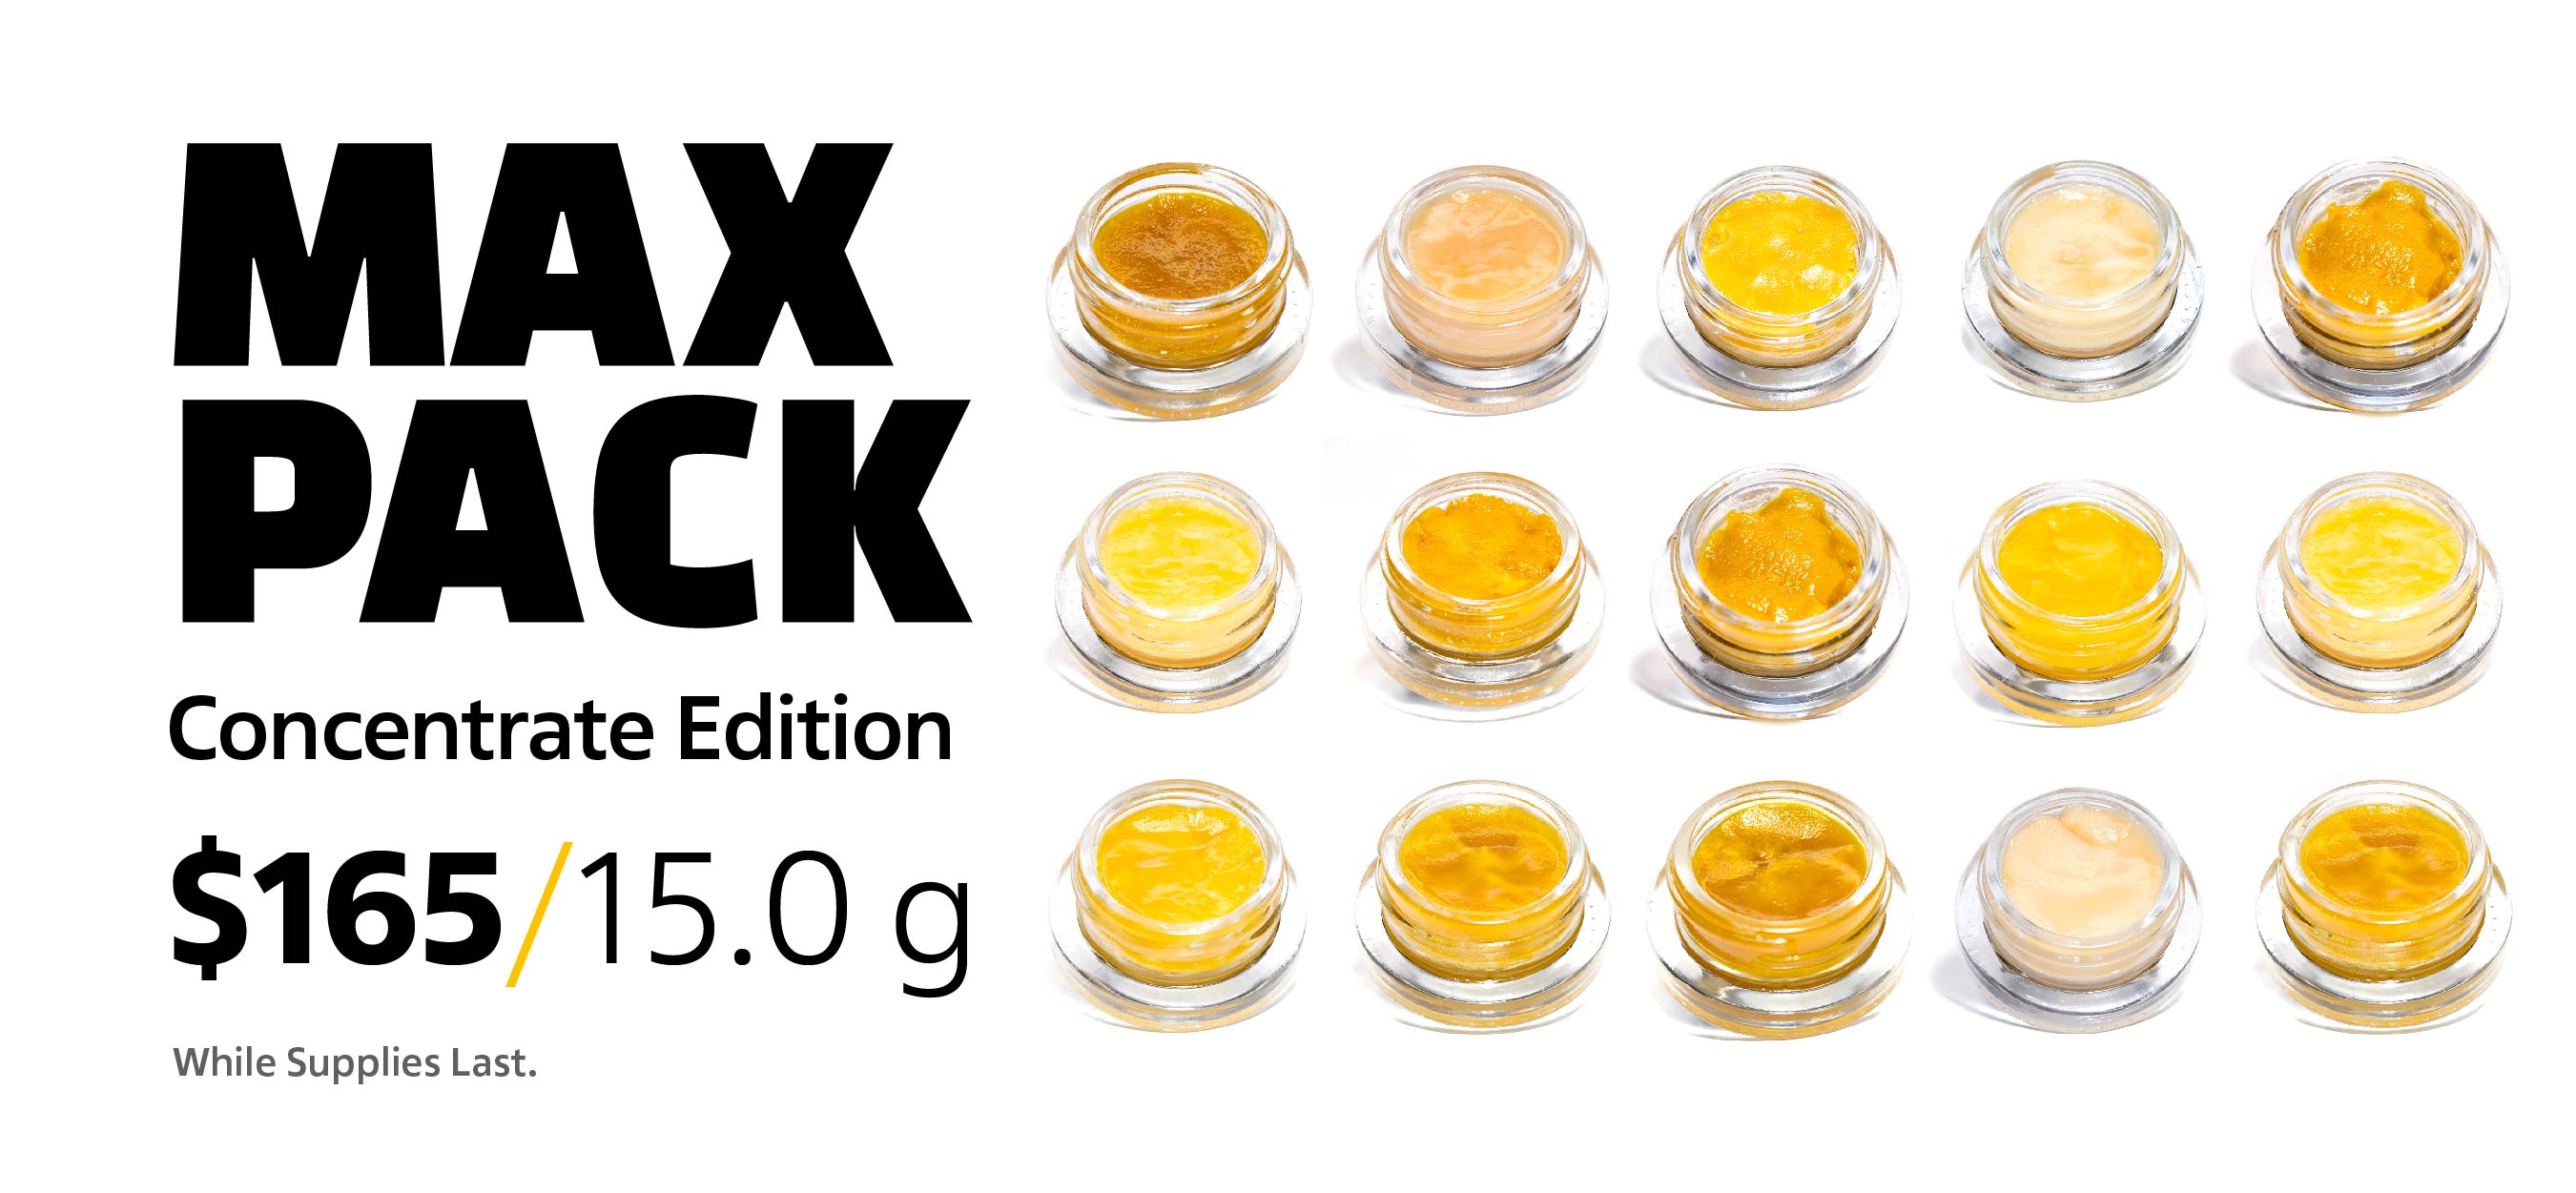 Max Pack Concentrate Mobile